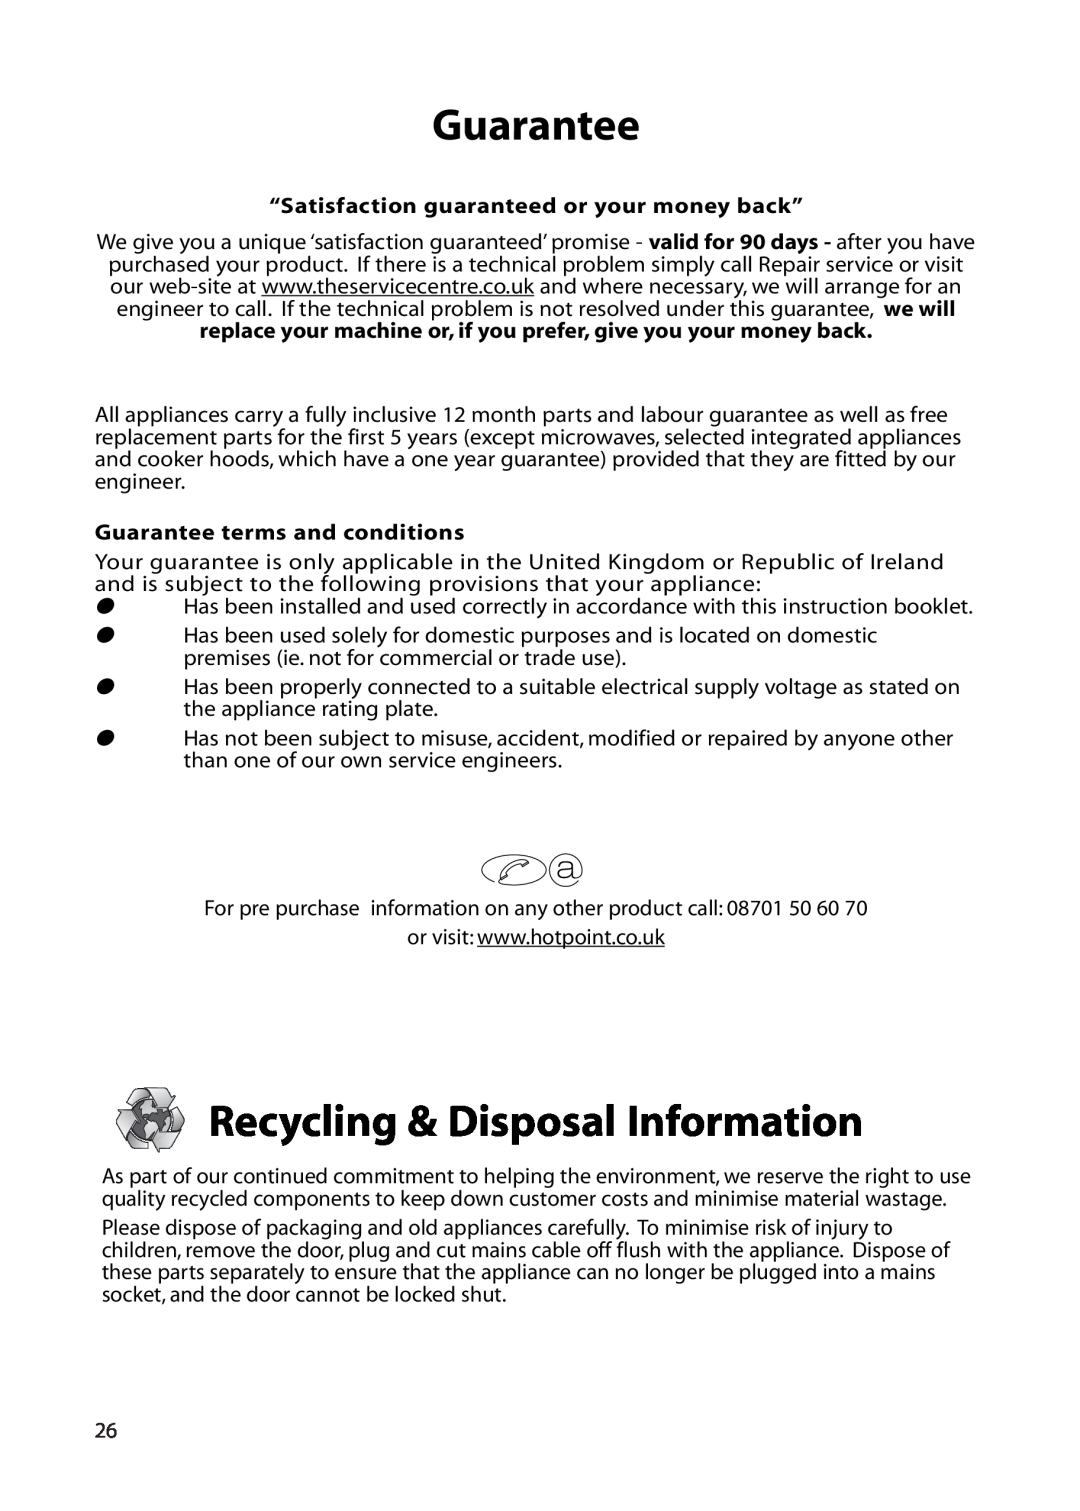 Hotpoint DF56, DF55 Guarantee, Recycling & Disposal Information, “Satisfaction guaranteed or your money back” 